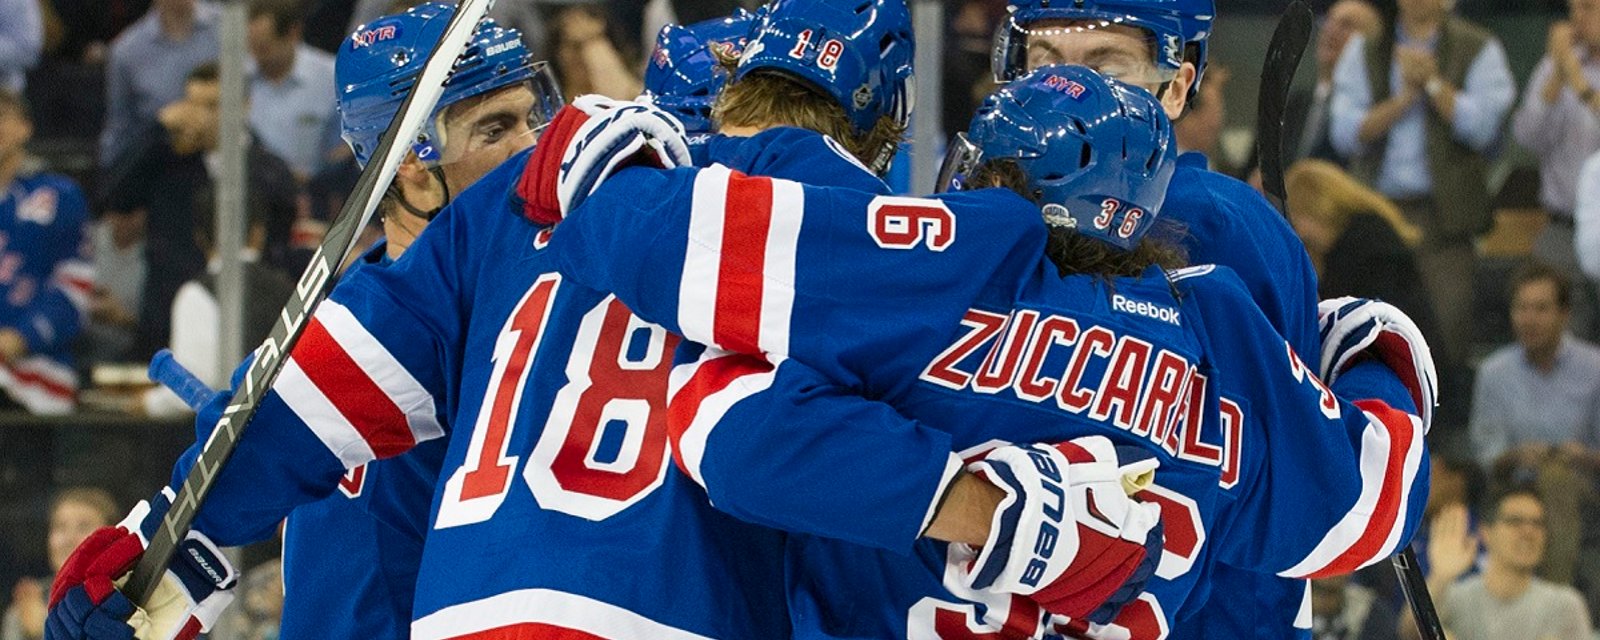 Report: Rangers lose one of their core players for at least the next two games.